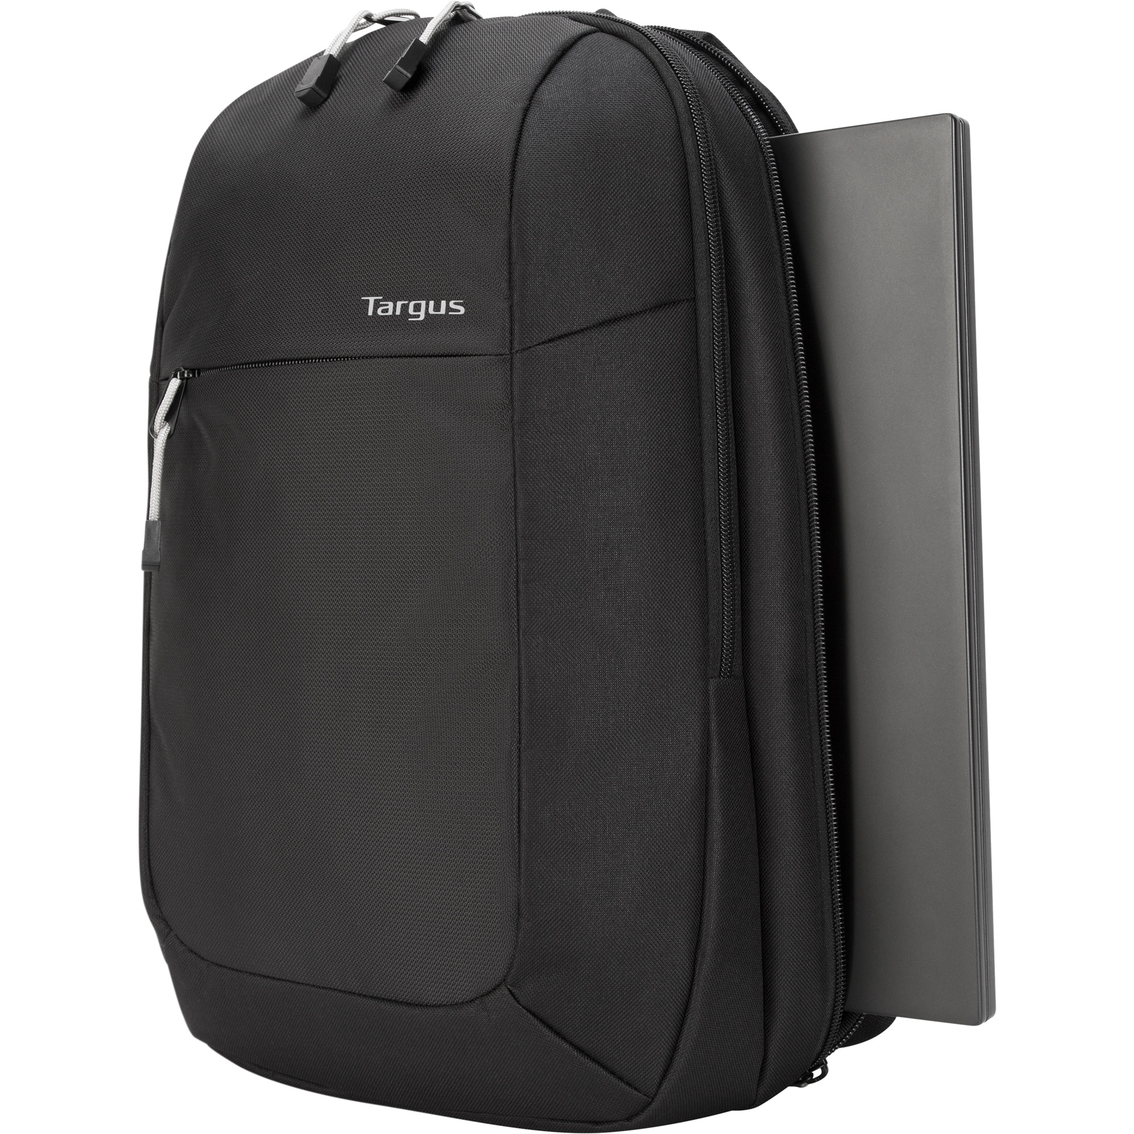 Targus 15.6 in. Intellect Essentials Backpack - Image 7 of 9